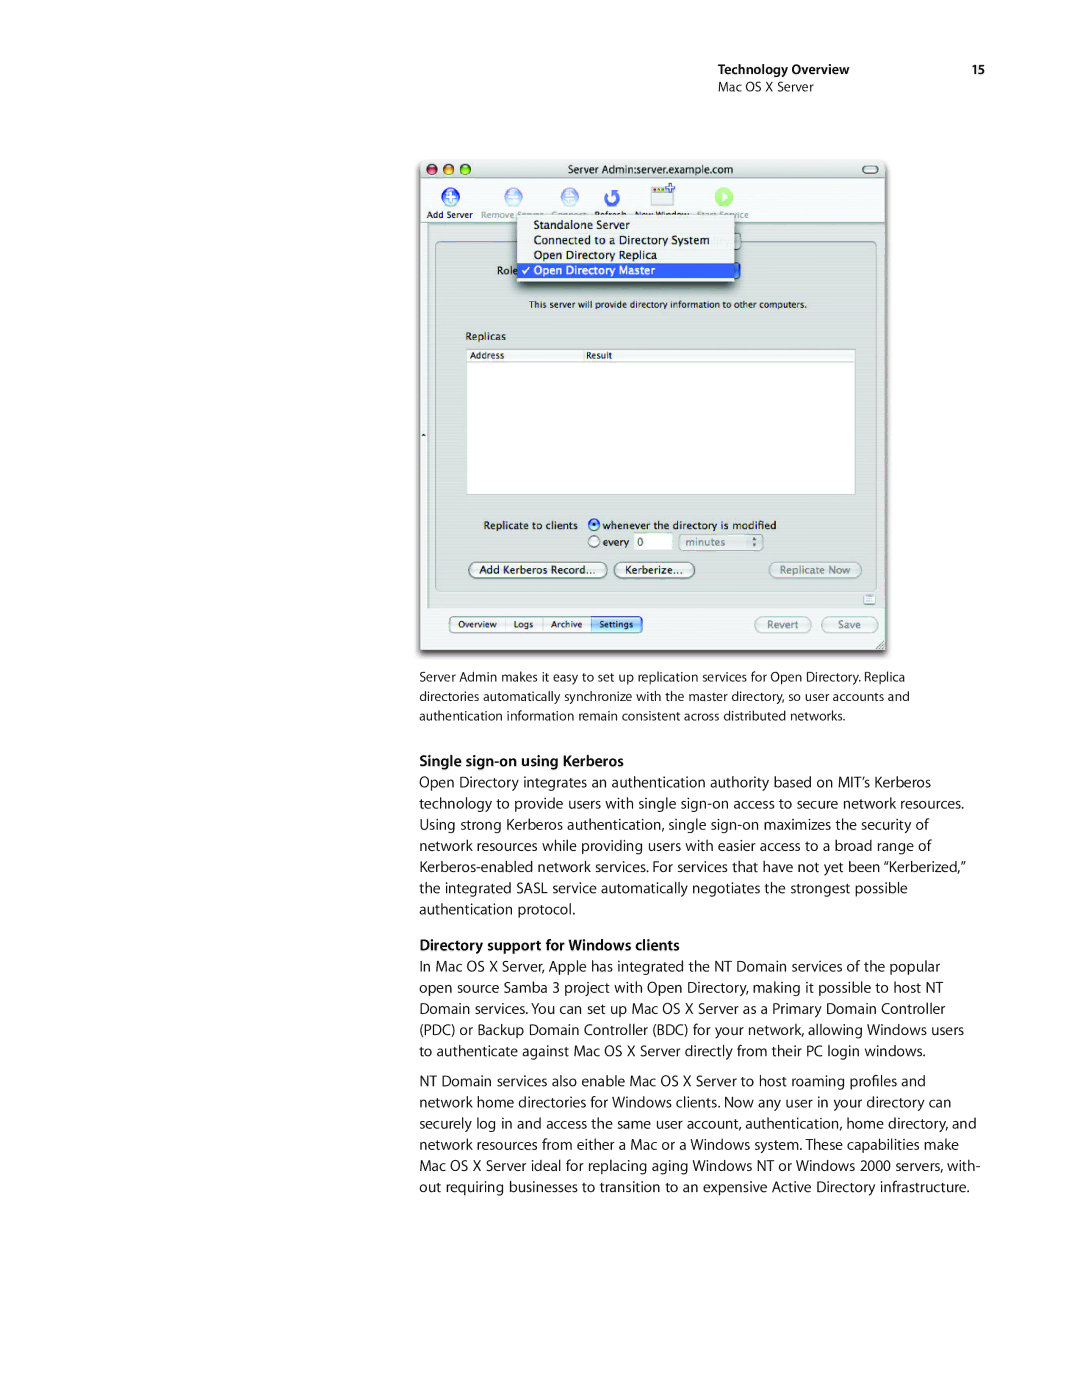 Apple G0442 Single sign-on using Kerberos, Directory support for Windows clients, Technology Overview Mac OS X Server 